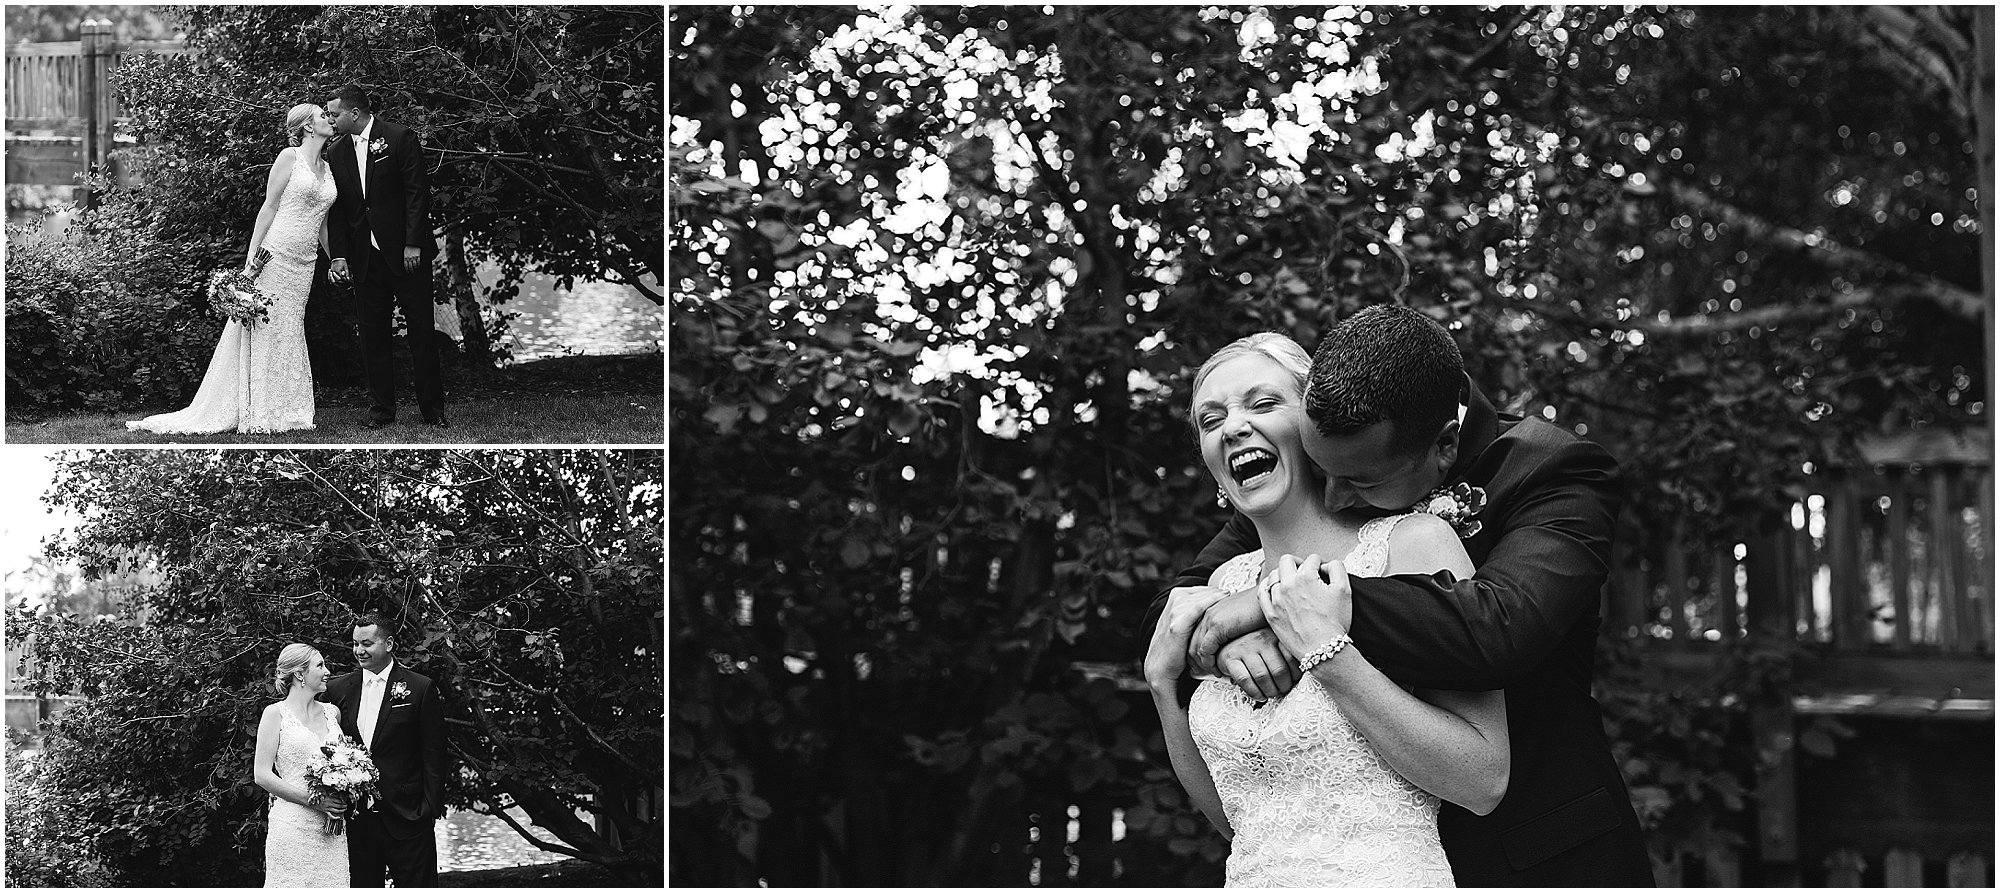 Deschutes Brewery Wedding black and white portrait photography. | Erica Swantek Photography